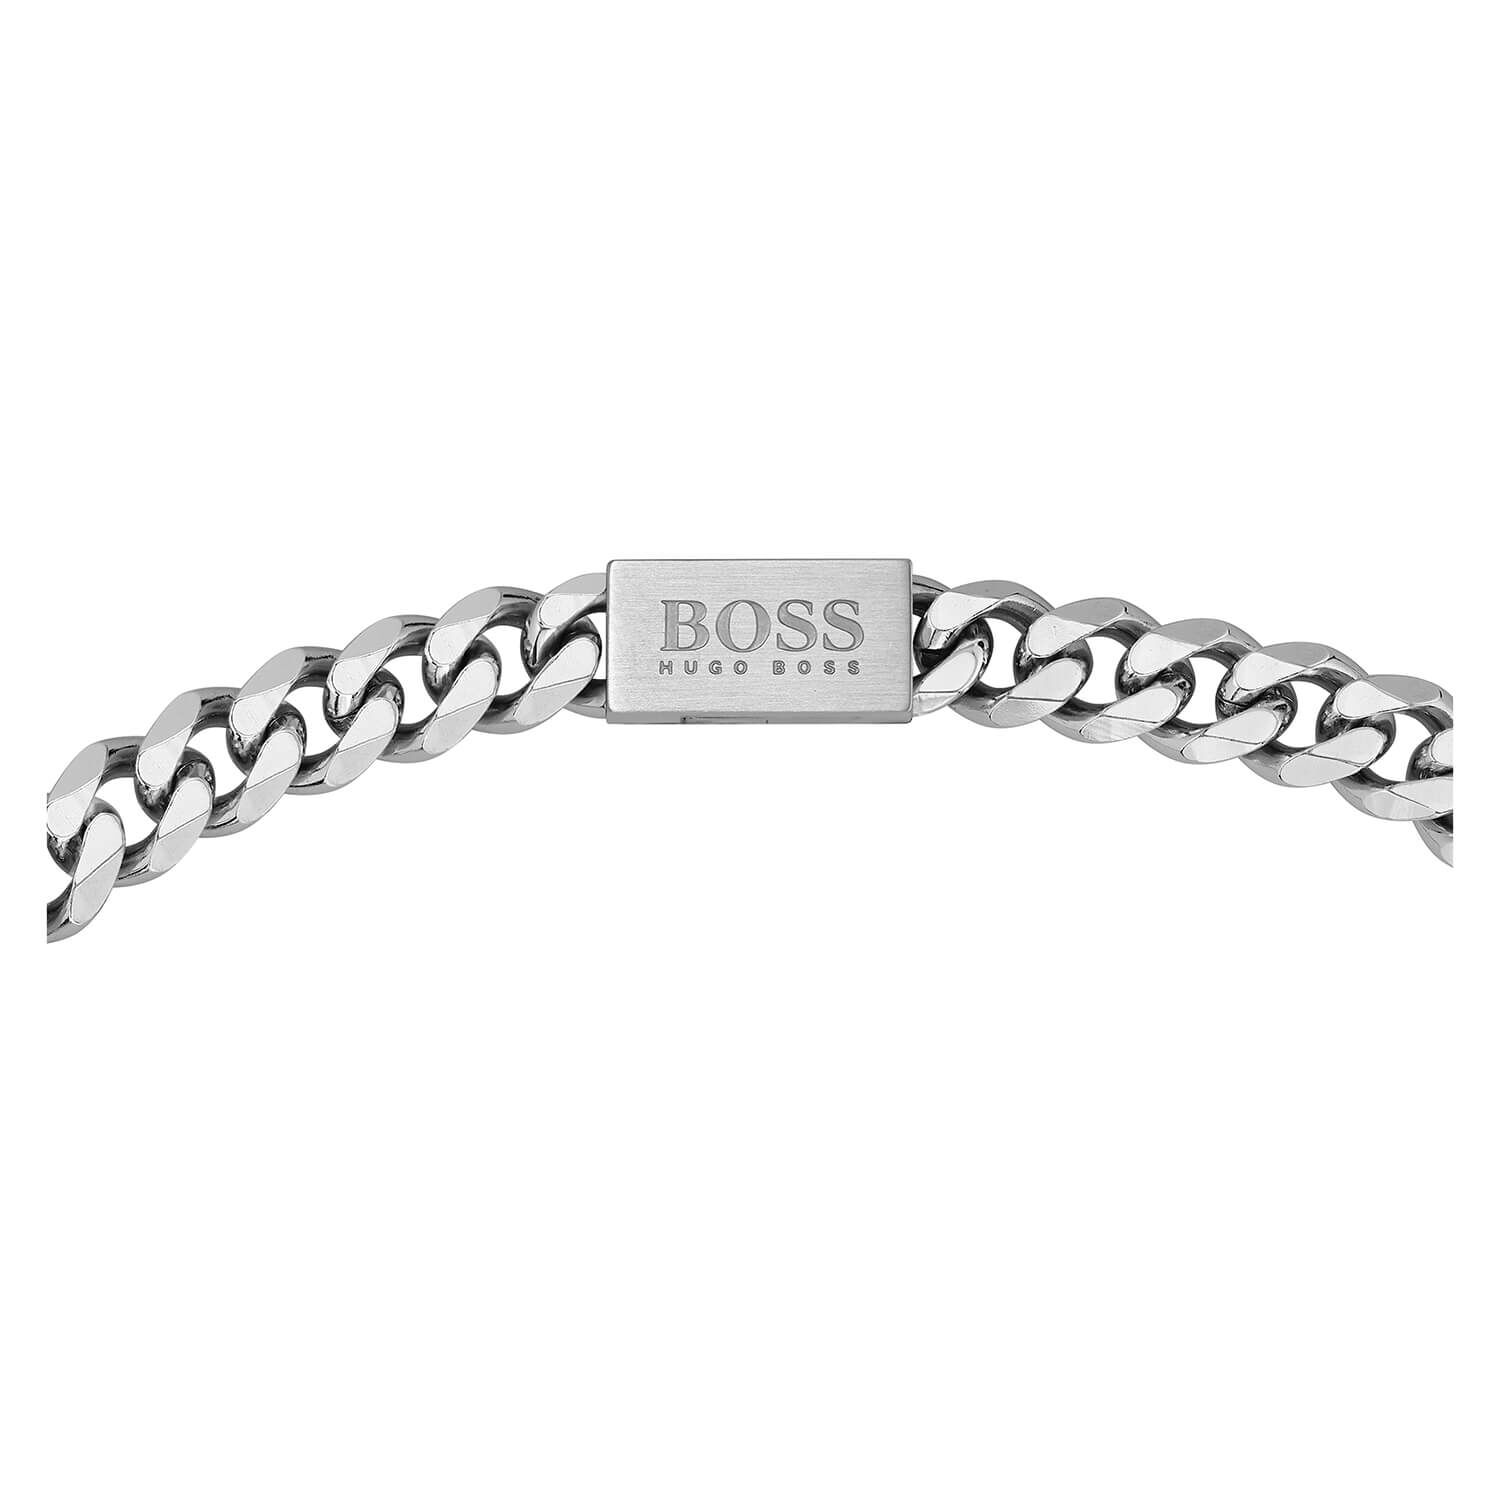 BOSS Men Gold Plated Curb Chain Bracelet 1580172 – Charles Fish